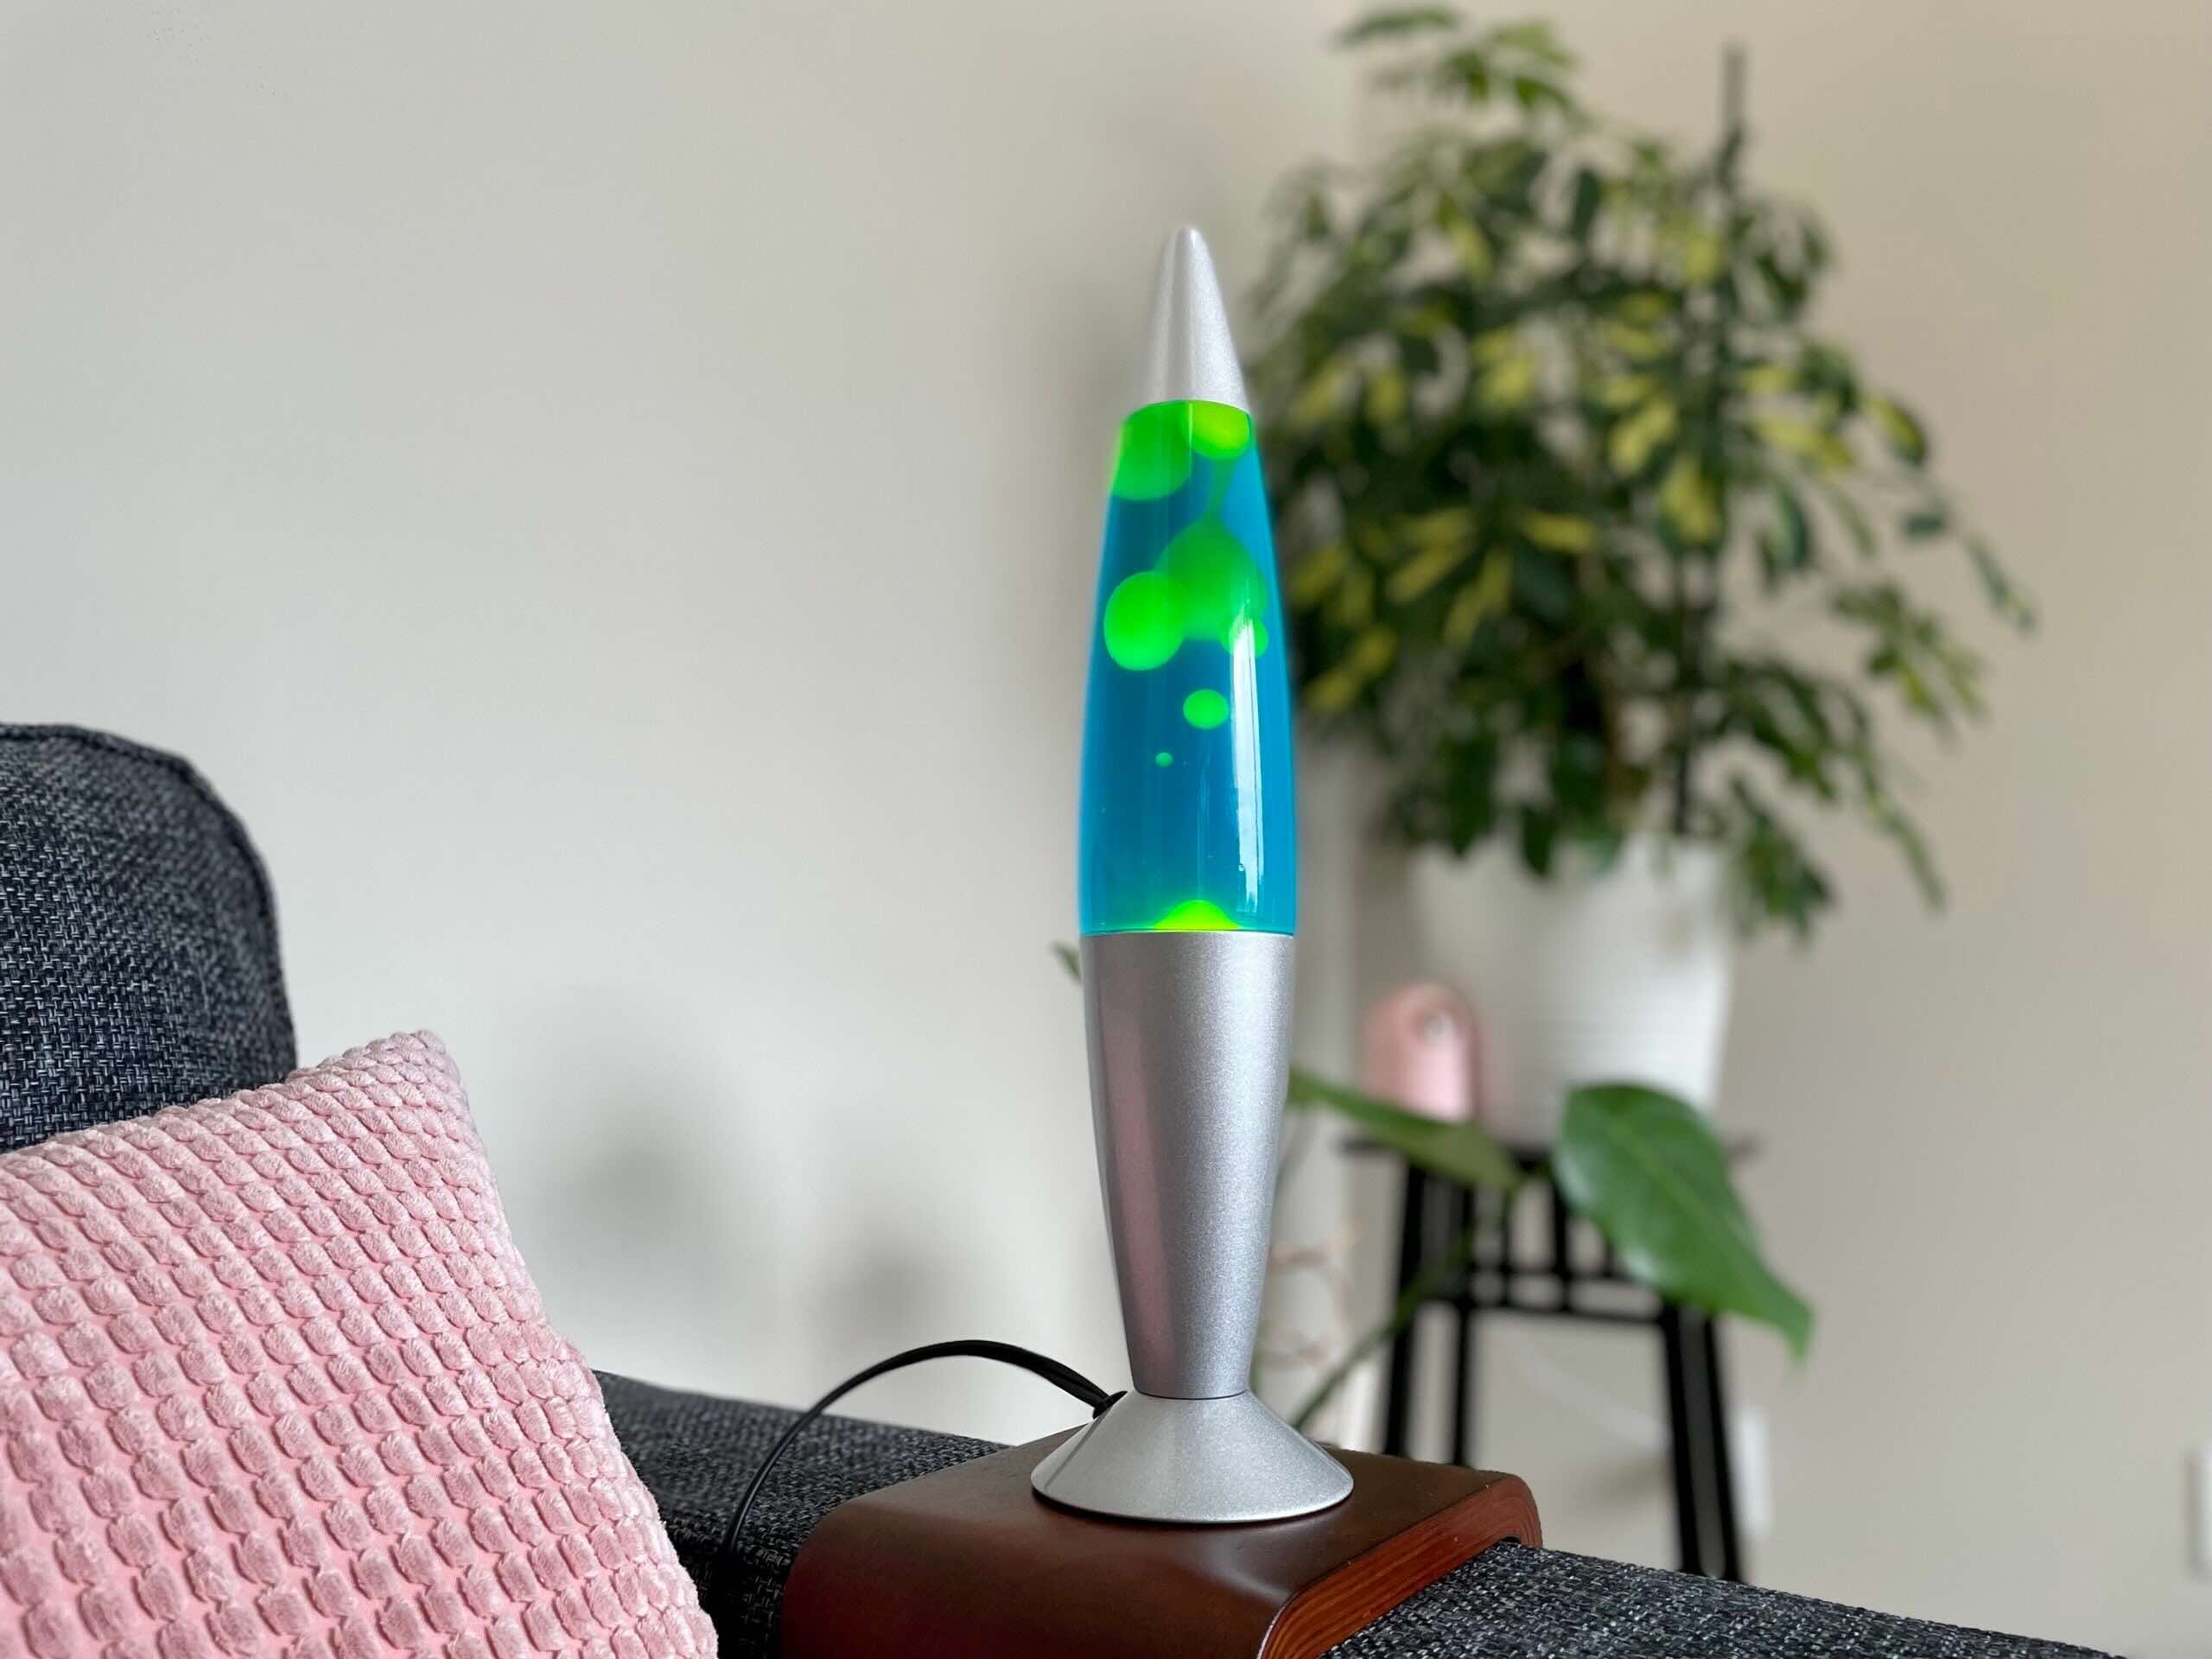 How Much Electricity Does A Lava Lamp Use?